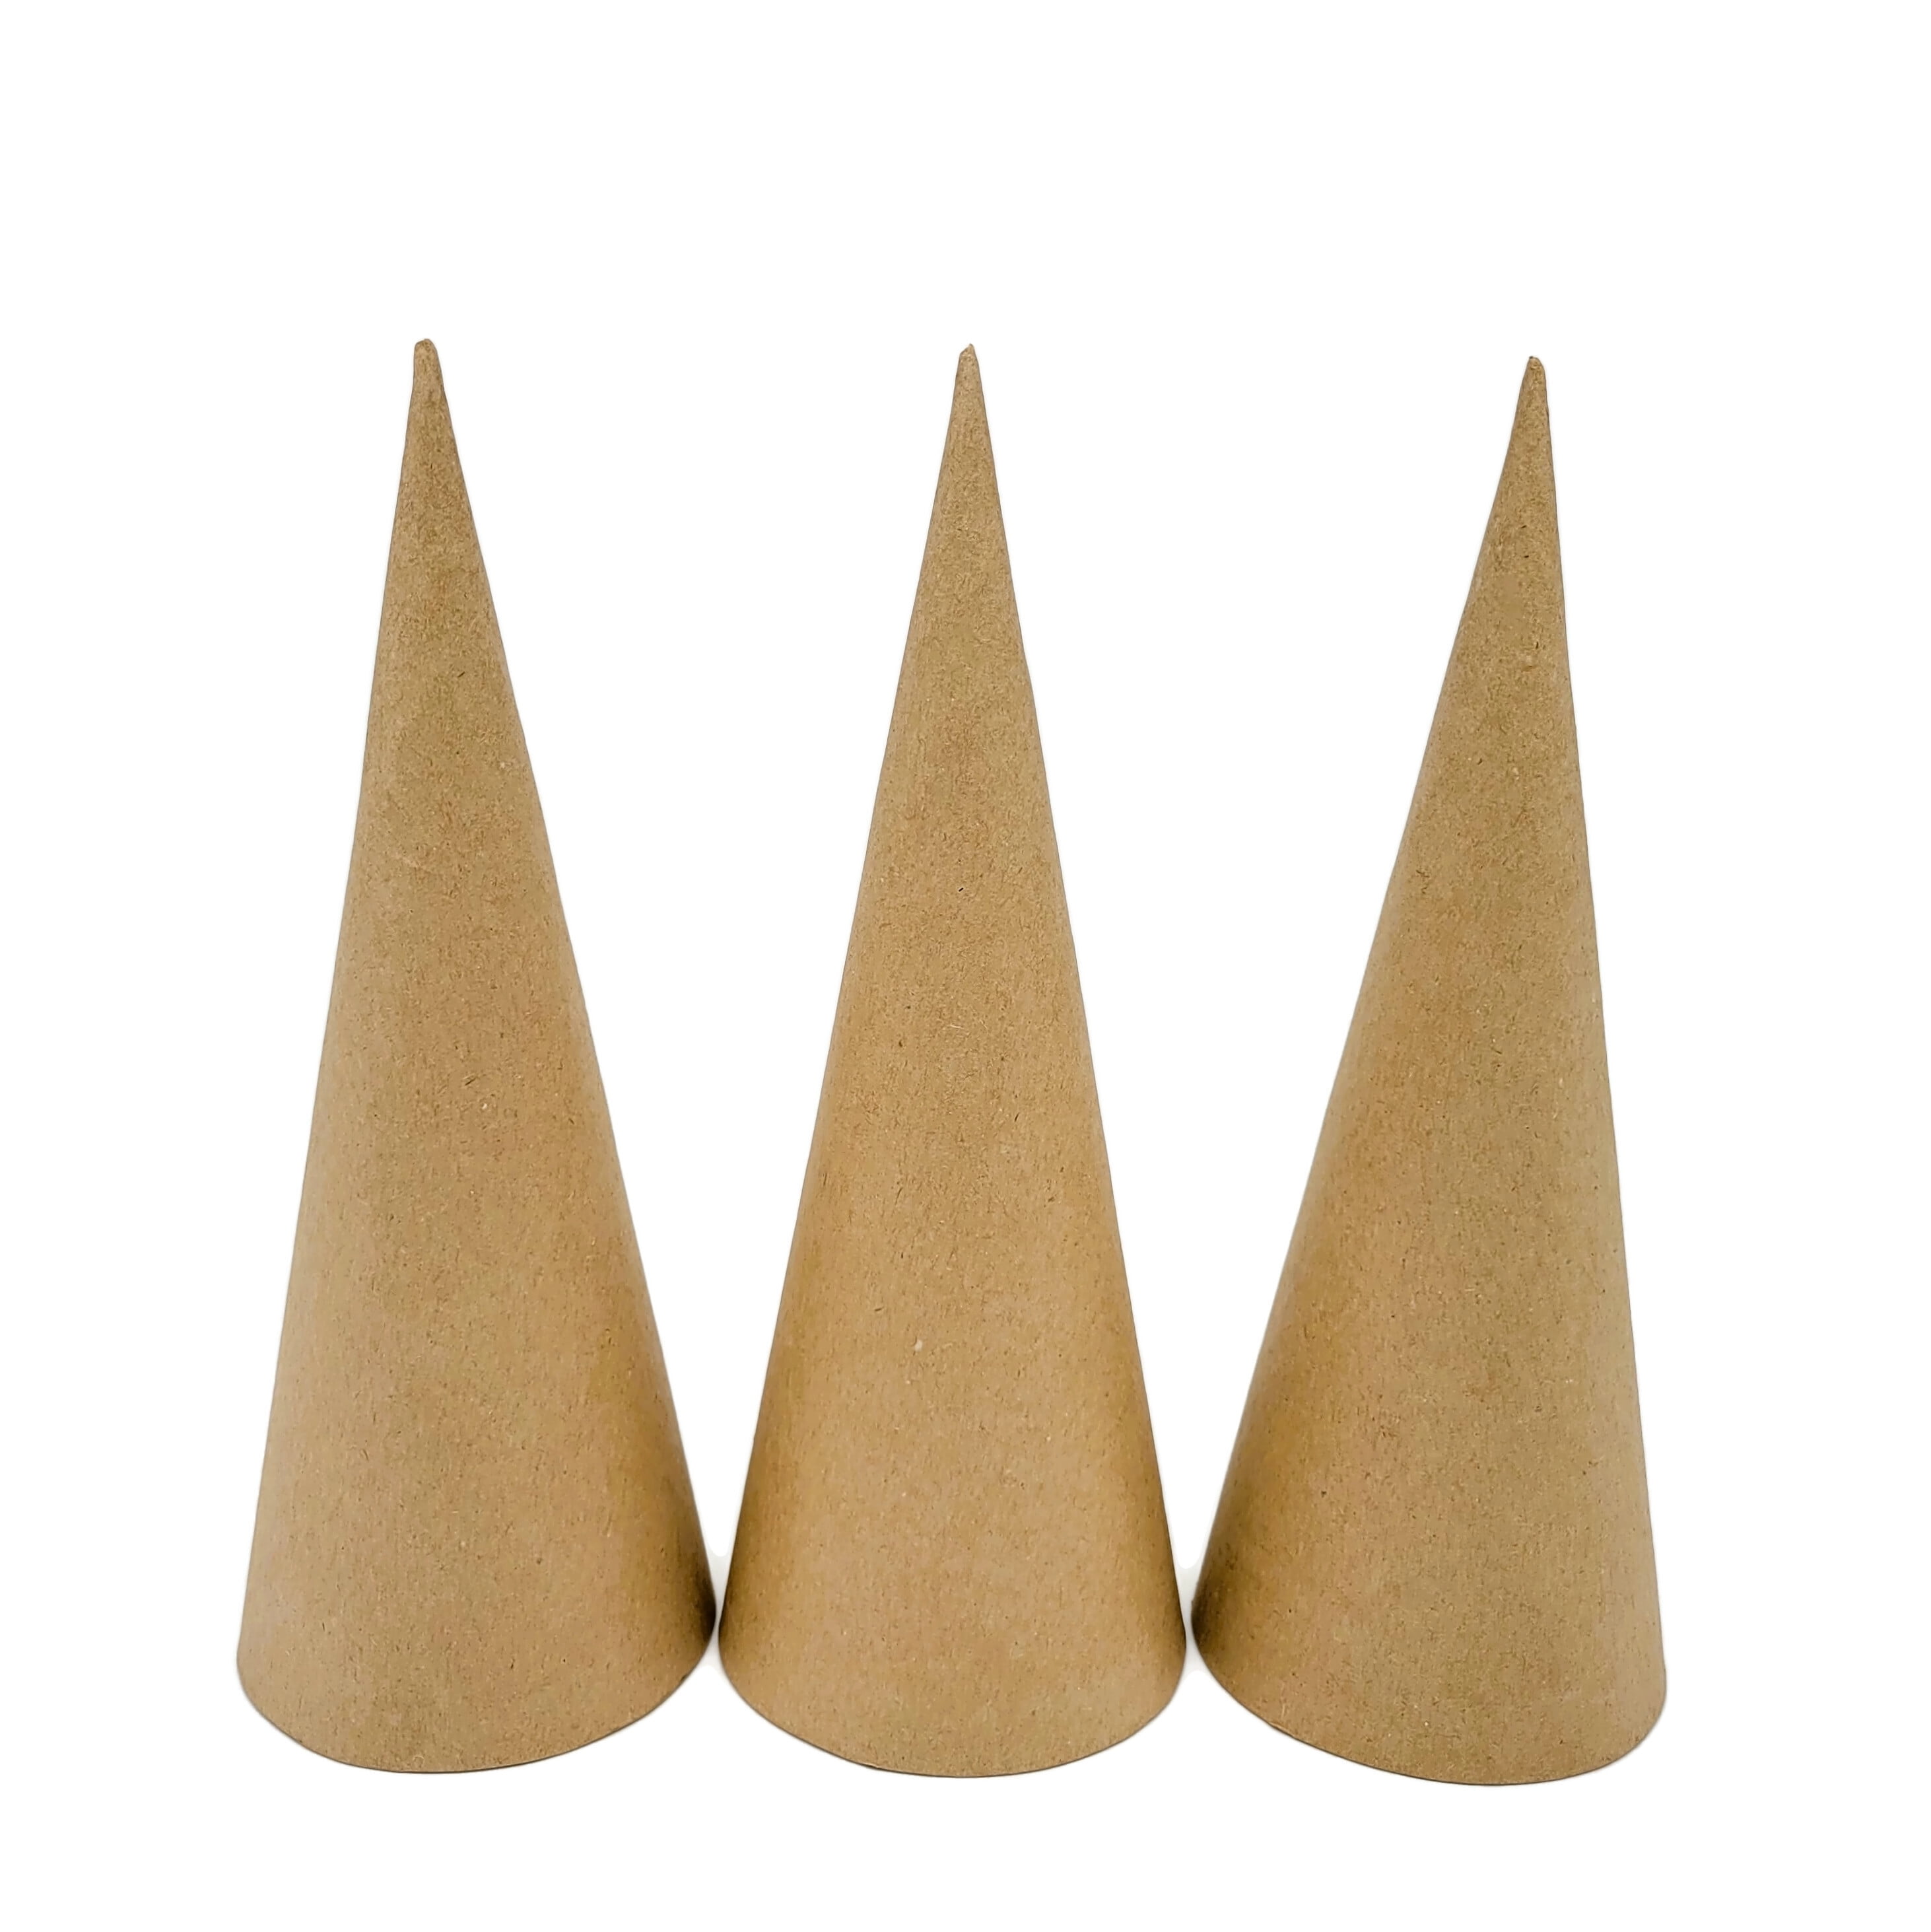 AllStellar Paper Mache Cones Open Bottom 10.63x4 in. Set of 3 (Medium) -  For DIY Art Projects, Crafts and Decorations!